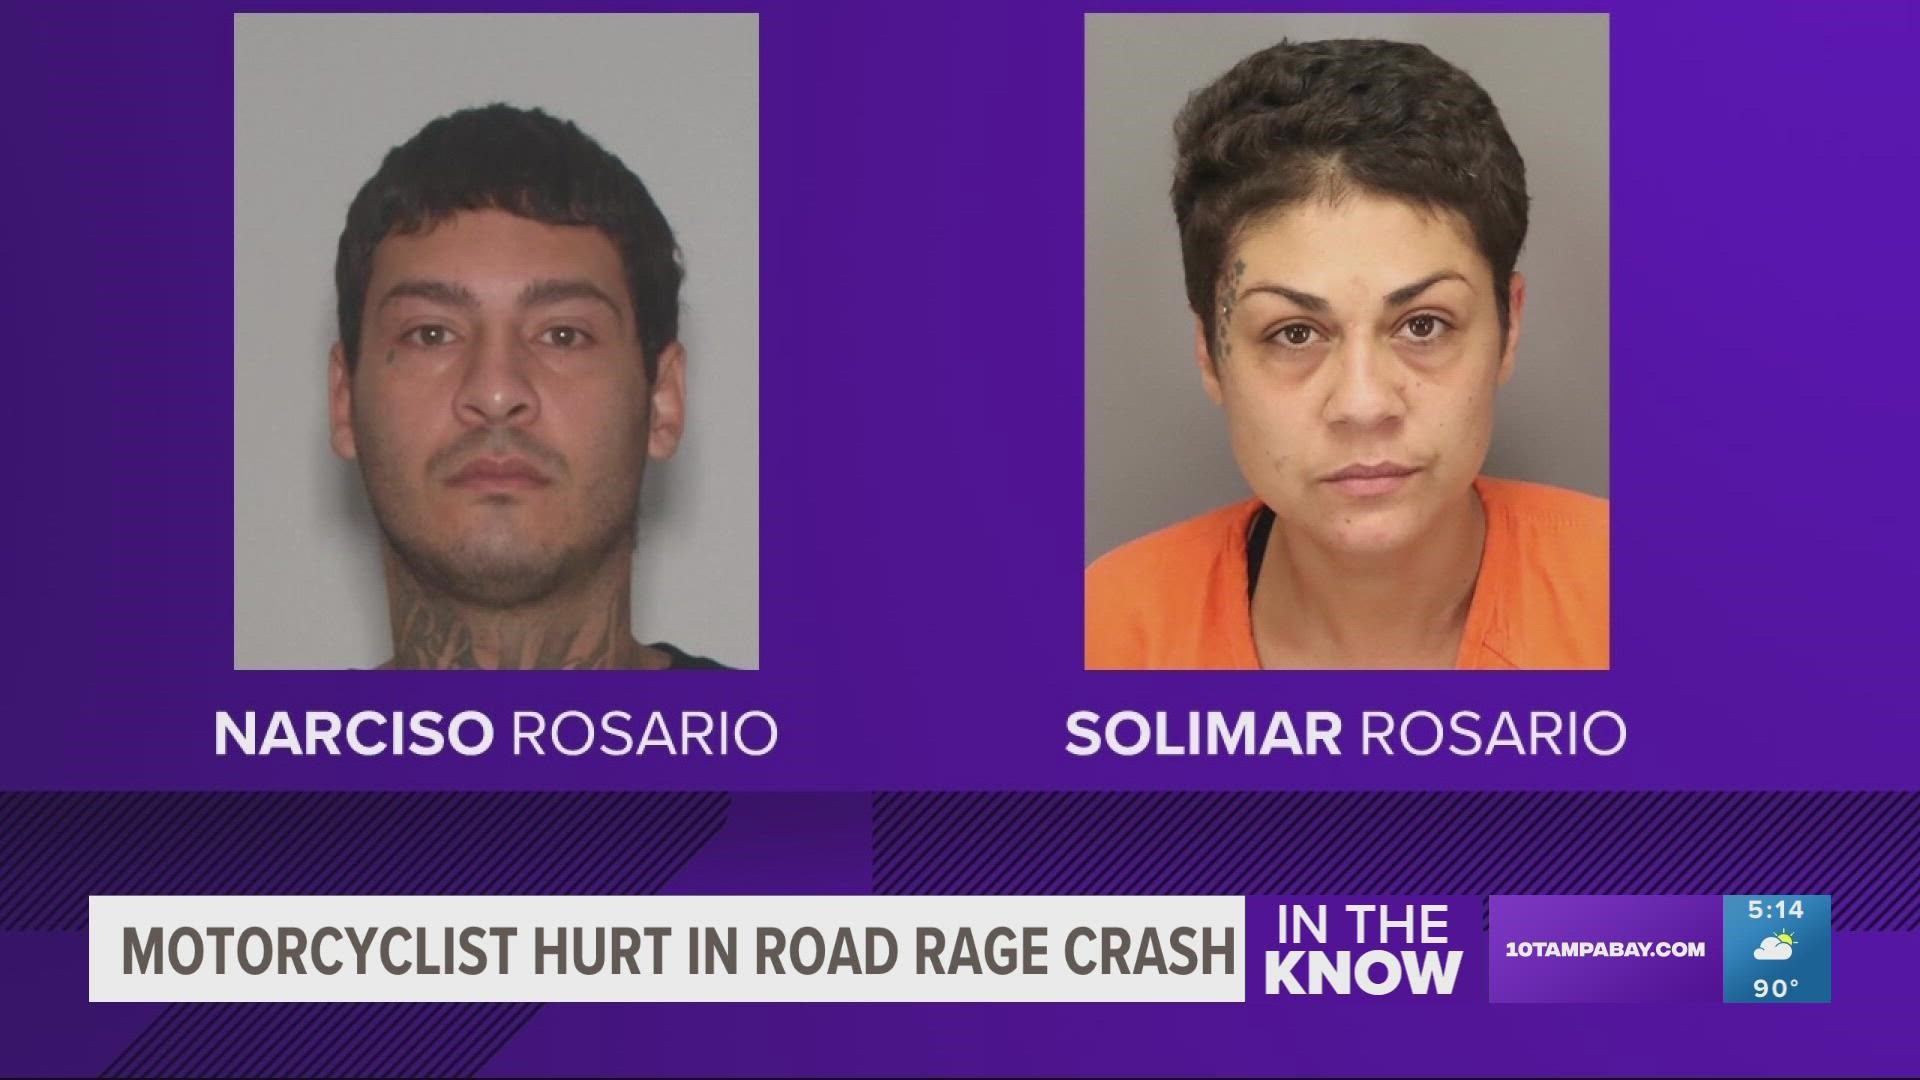 Police said the passenger taunted the motorcyclist before the car's driver intentionally hit the motorcyclist, causing it to crash into oncoming traffic.